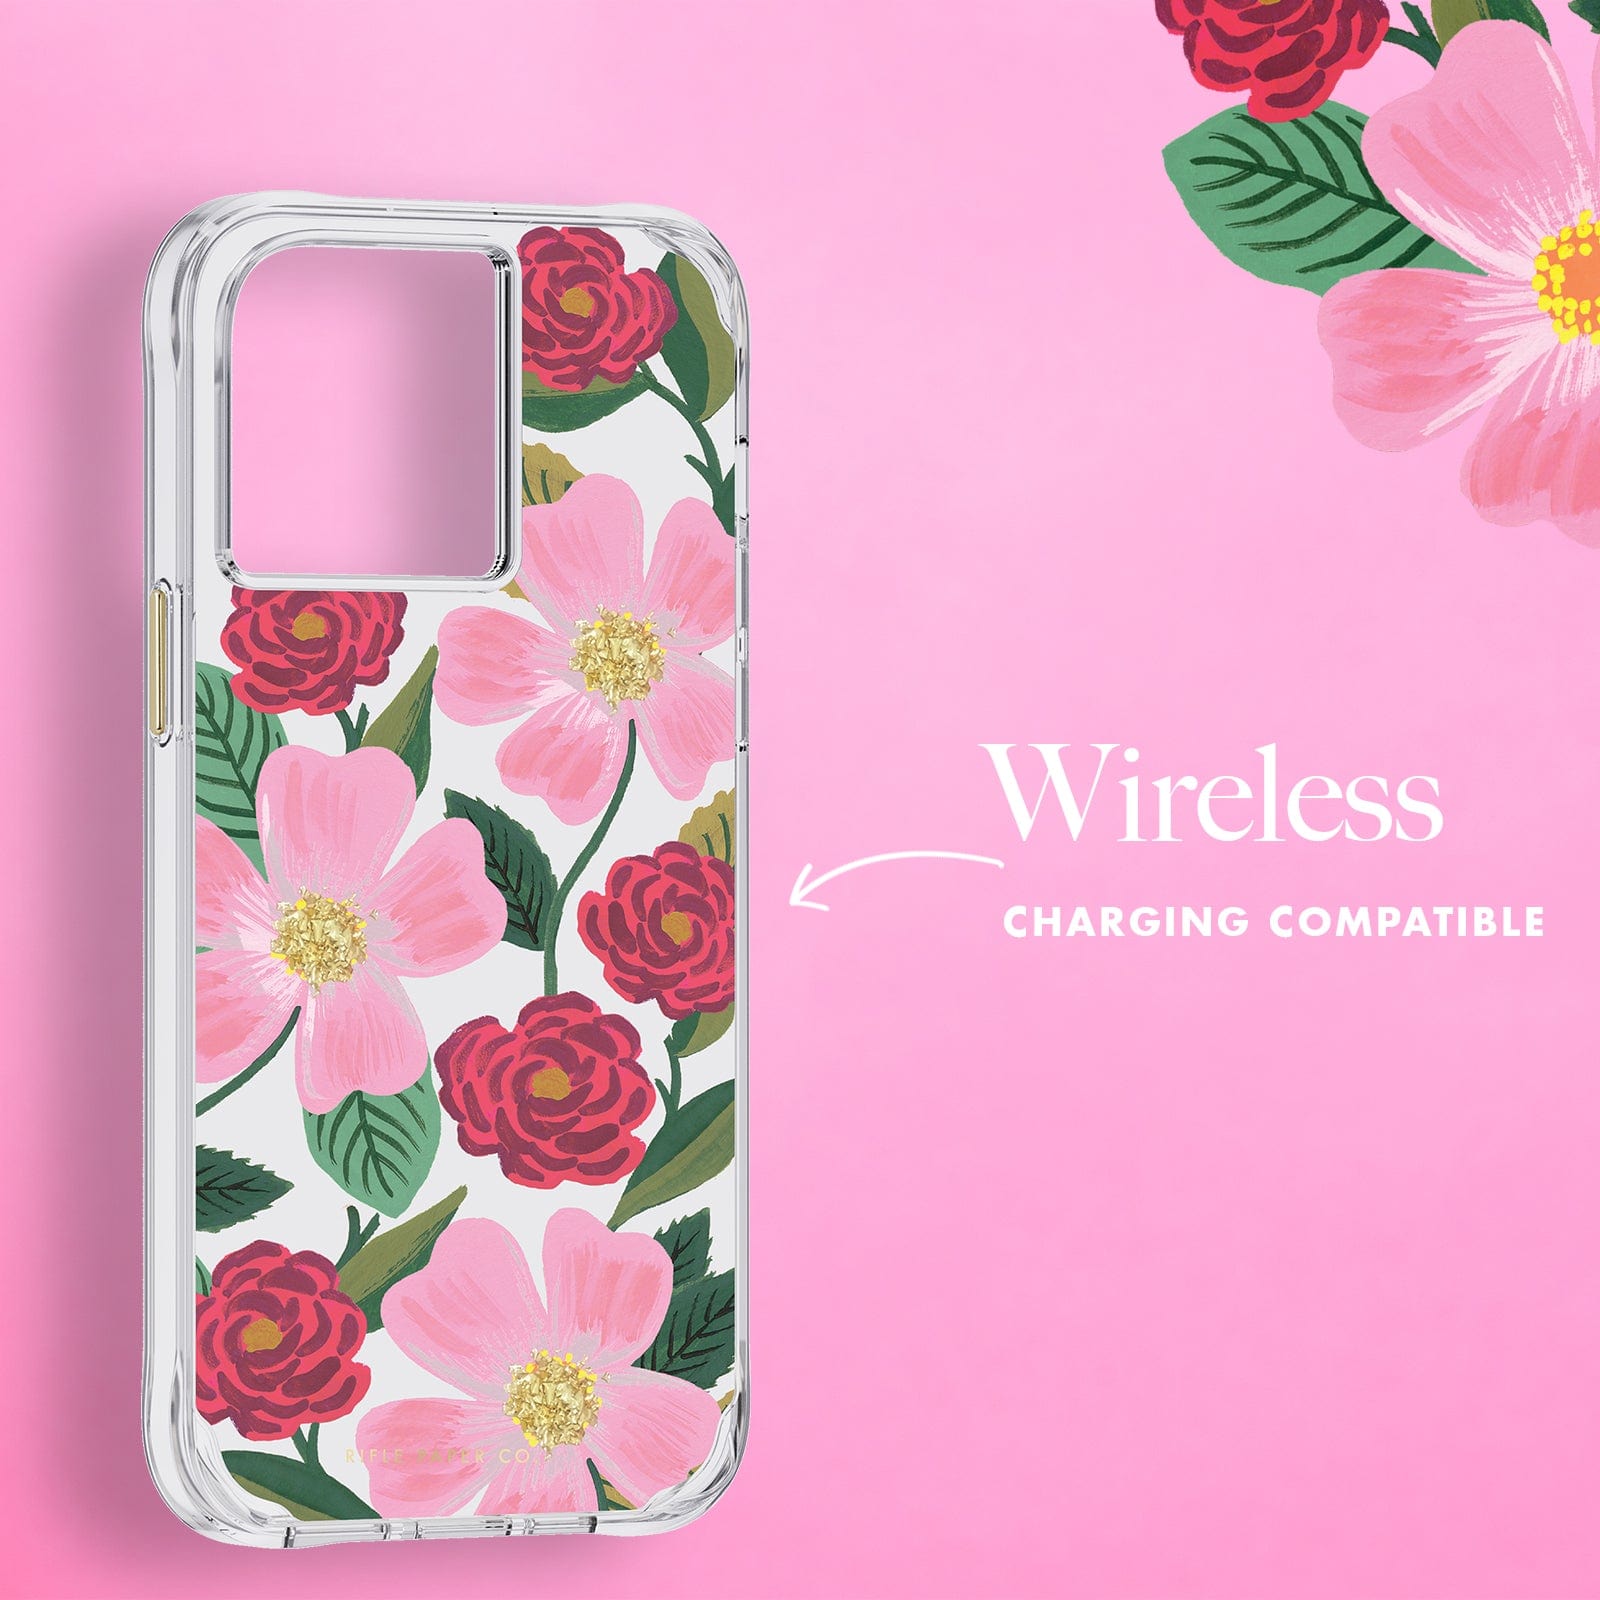 Wireless charging compatible. color::Rose Garden